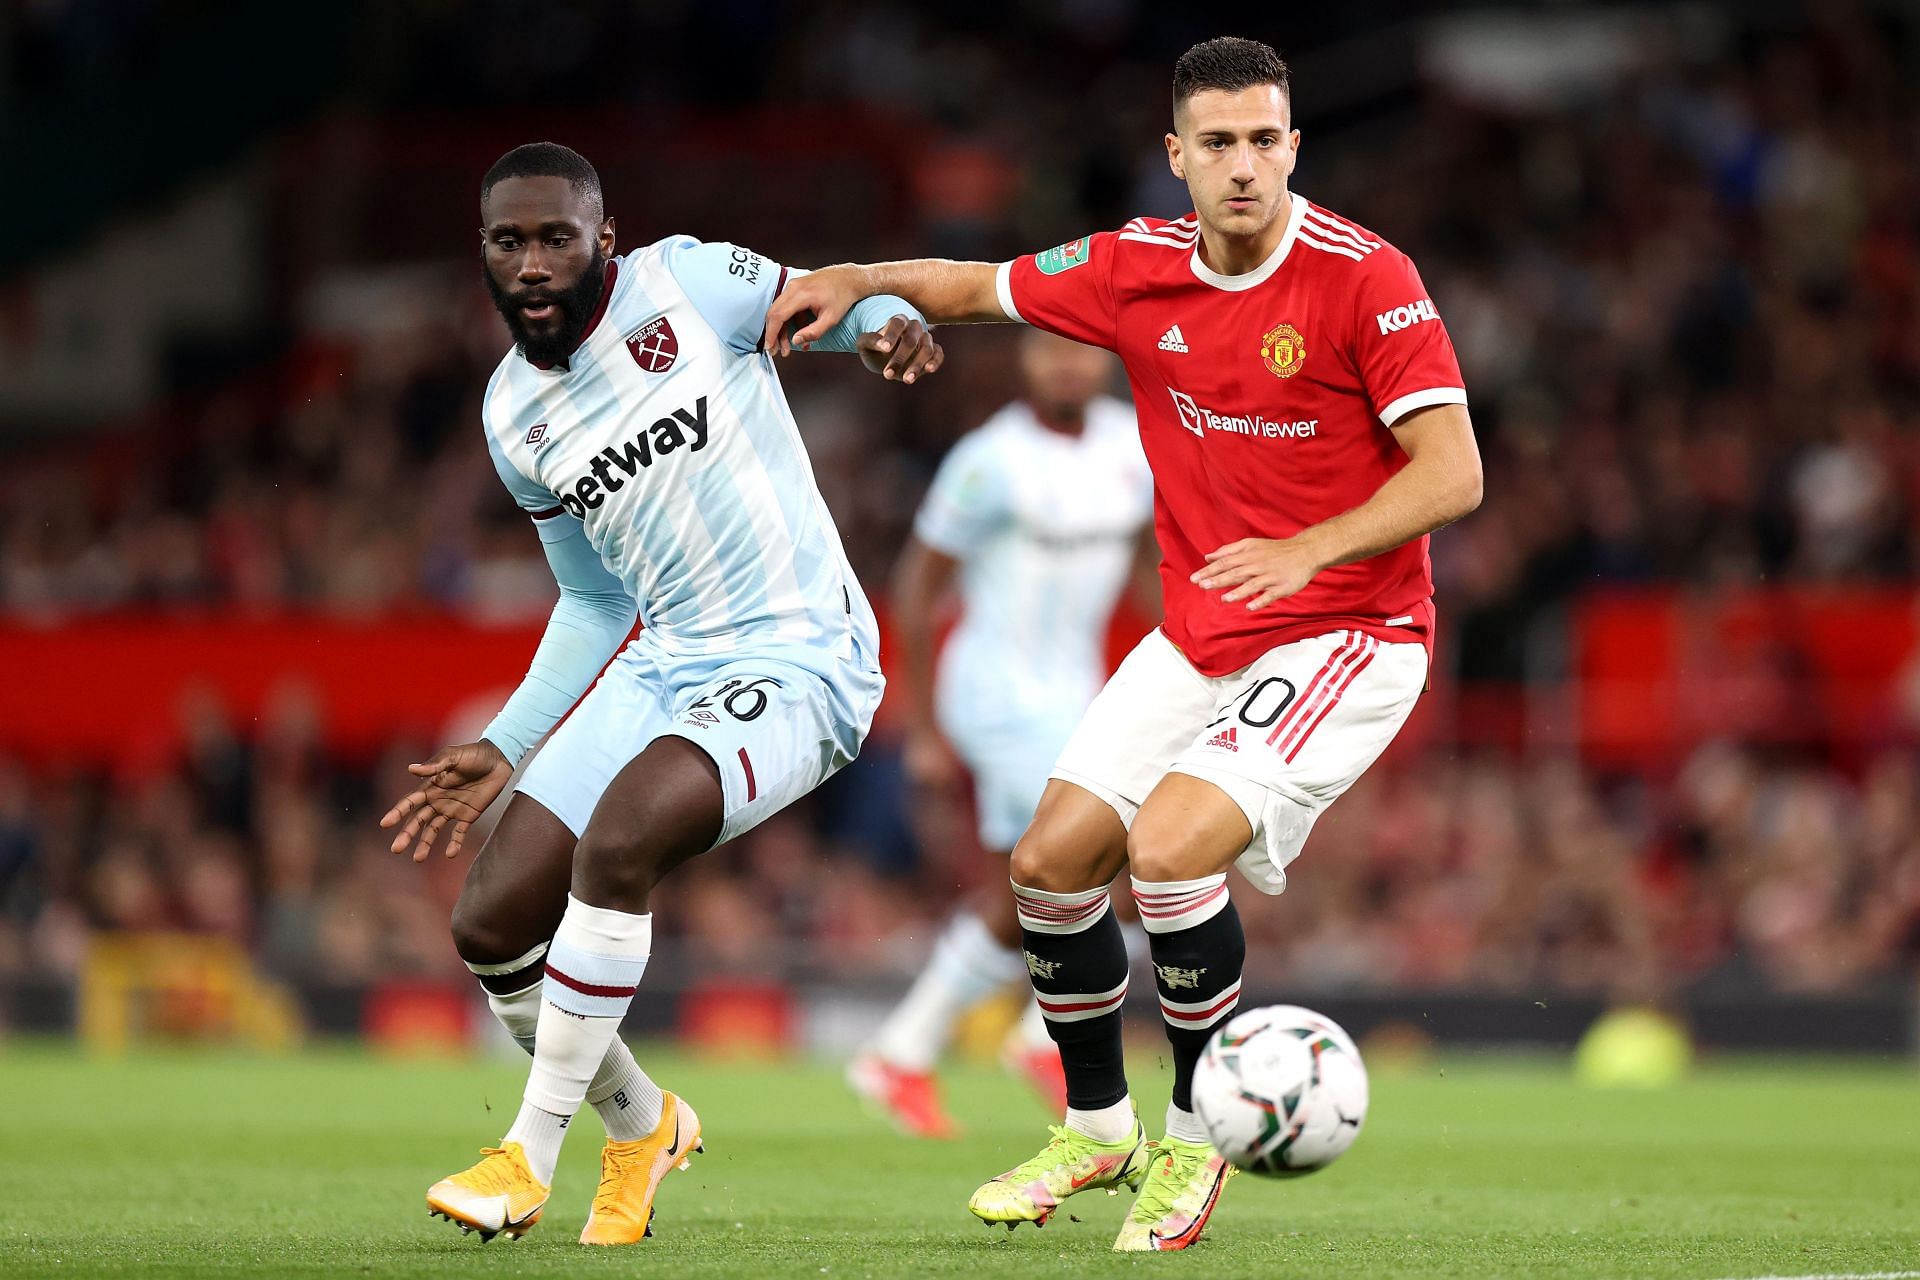 Diogo Dalot has failed to nail down a starting spot under Ole